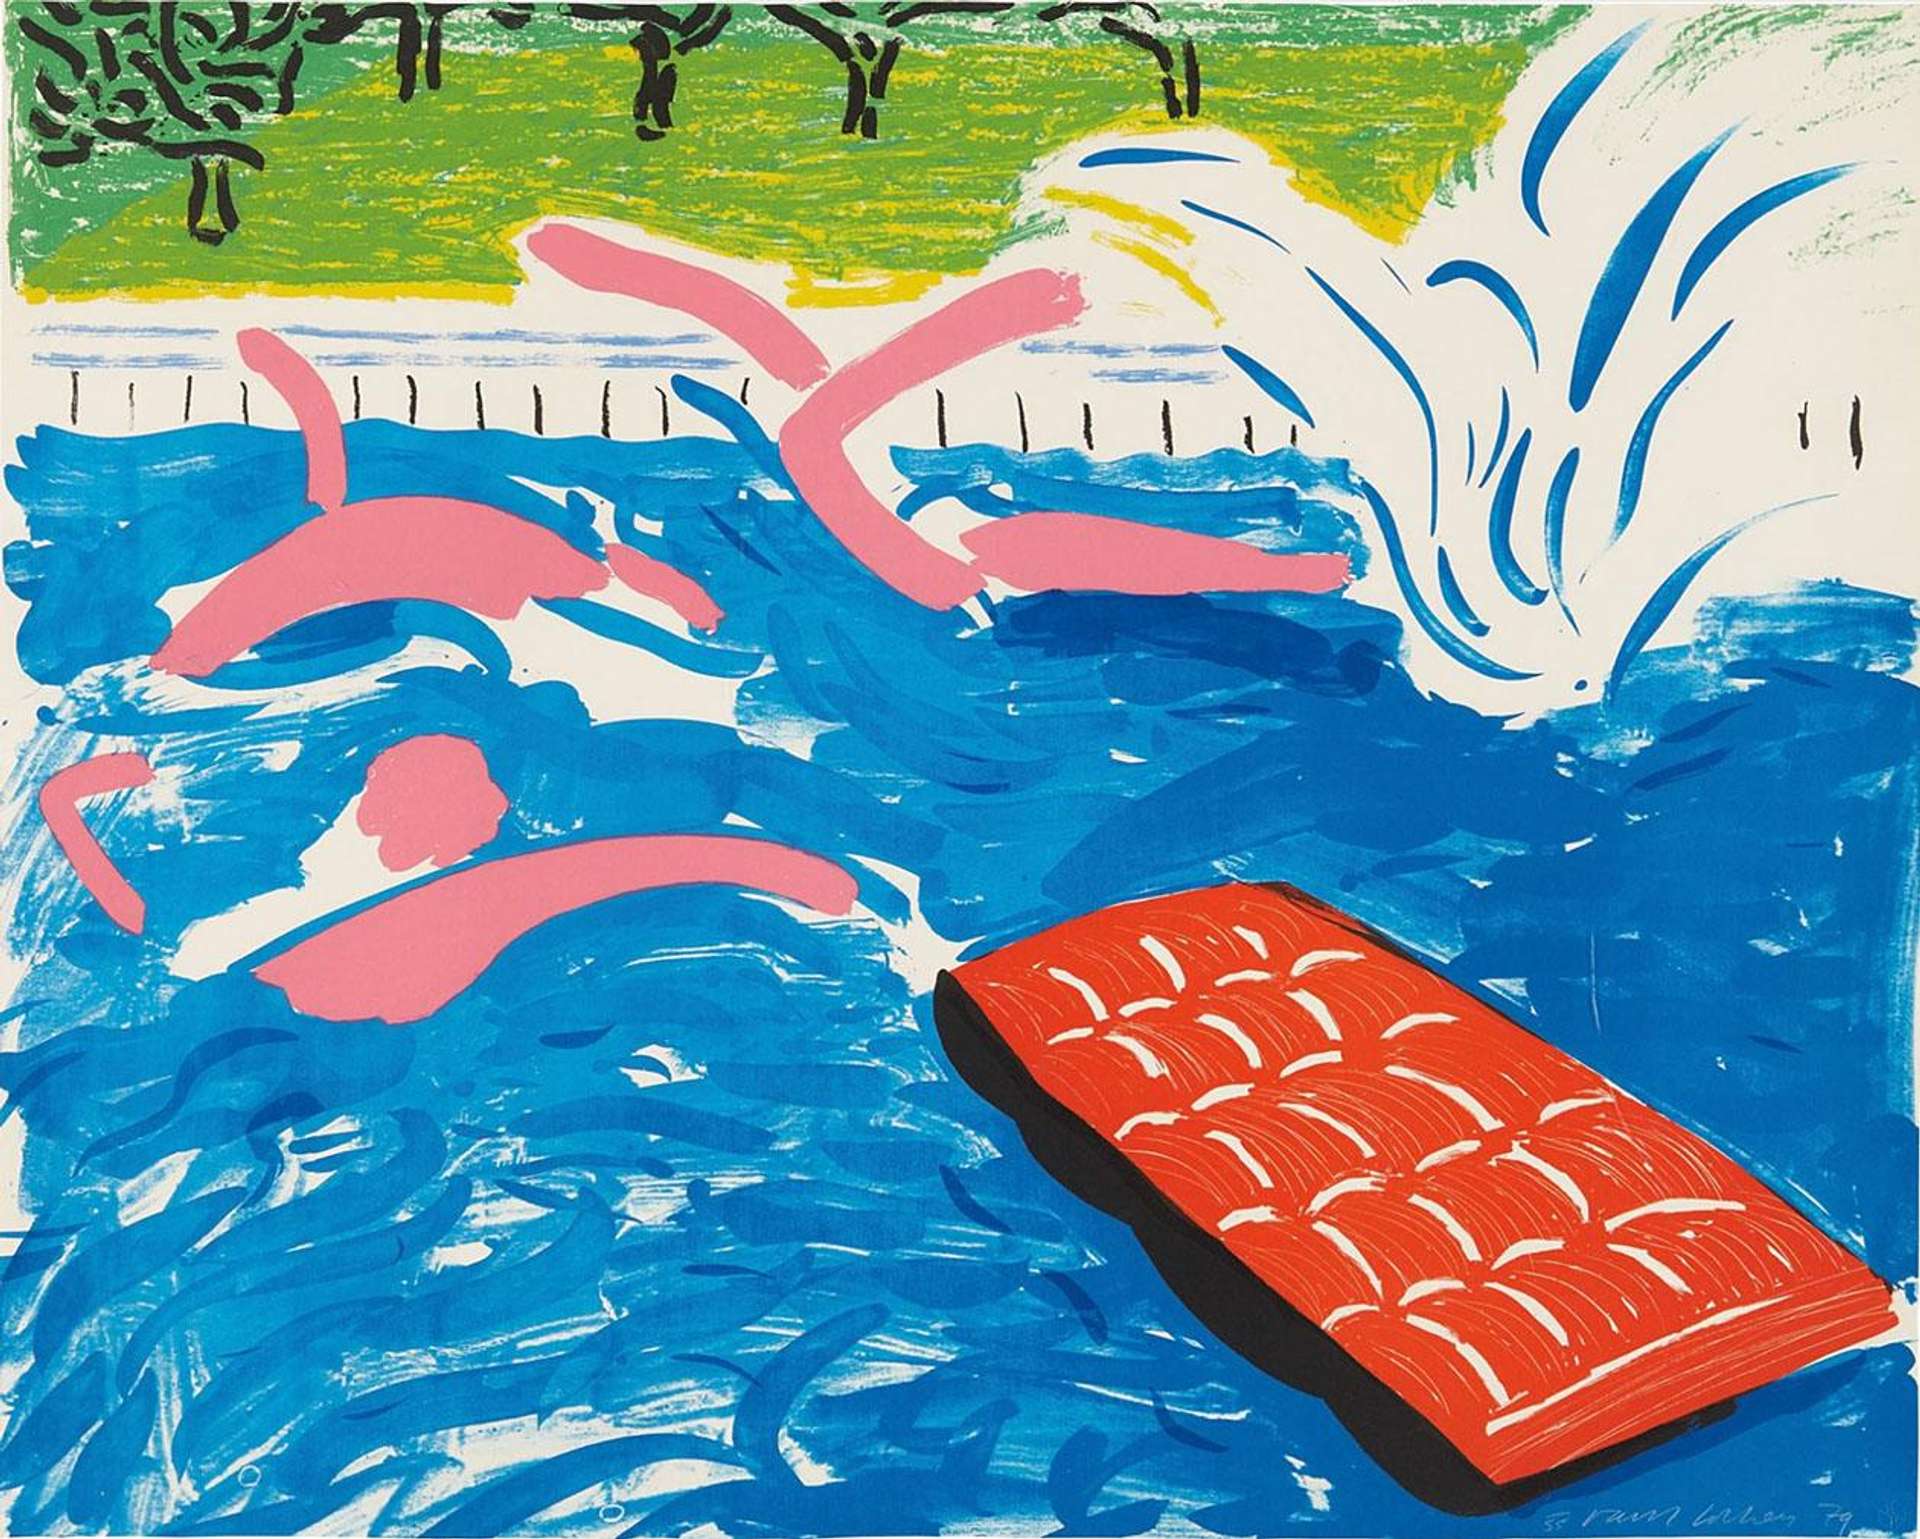 A colourful depiction of a swimming pool. An orange-red diving board reaches from the right corner of the work to the centre of the composition. In the blue water, abstract figures are delineated with pink, and a splash emerges from the water in white and blue lines.